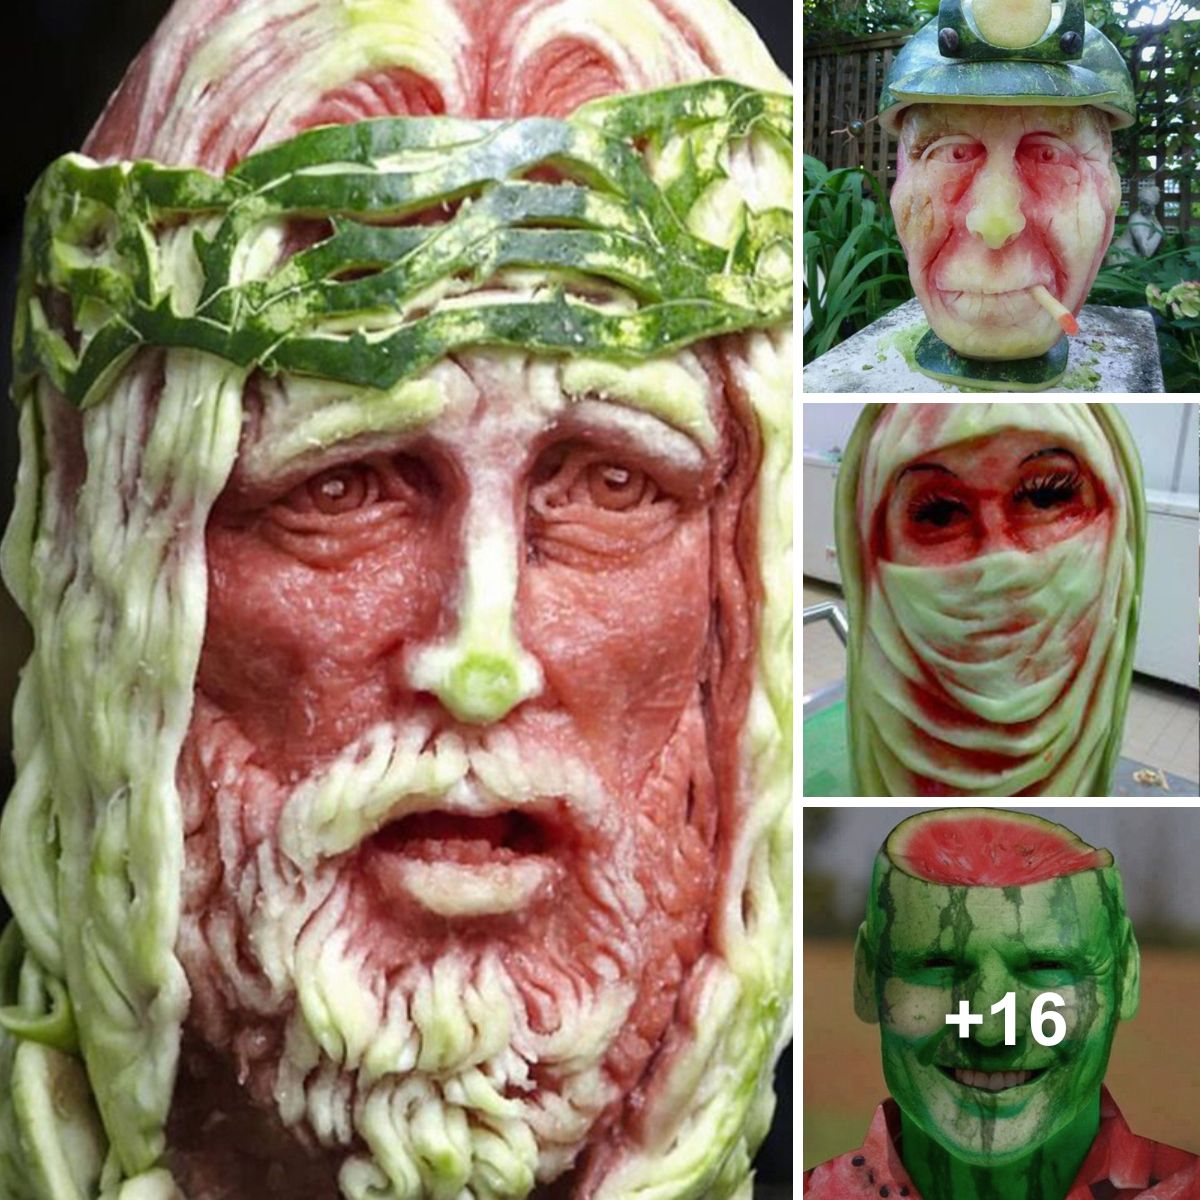 Exquisite Watermelon Sculptures: Edible Art That's Almost Too Beautiful to Eat